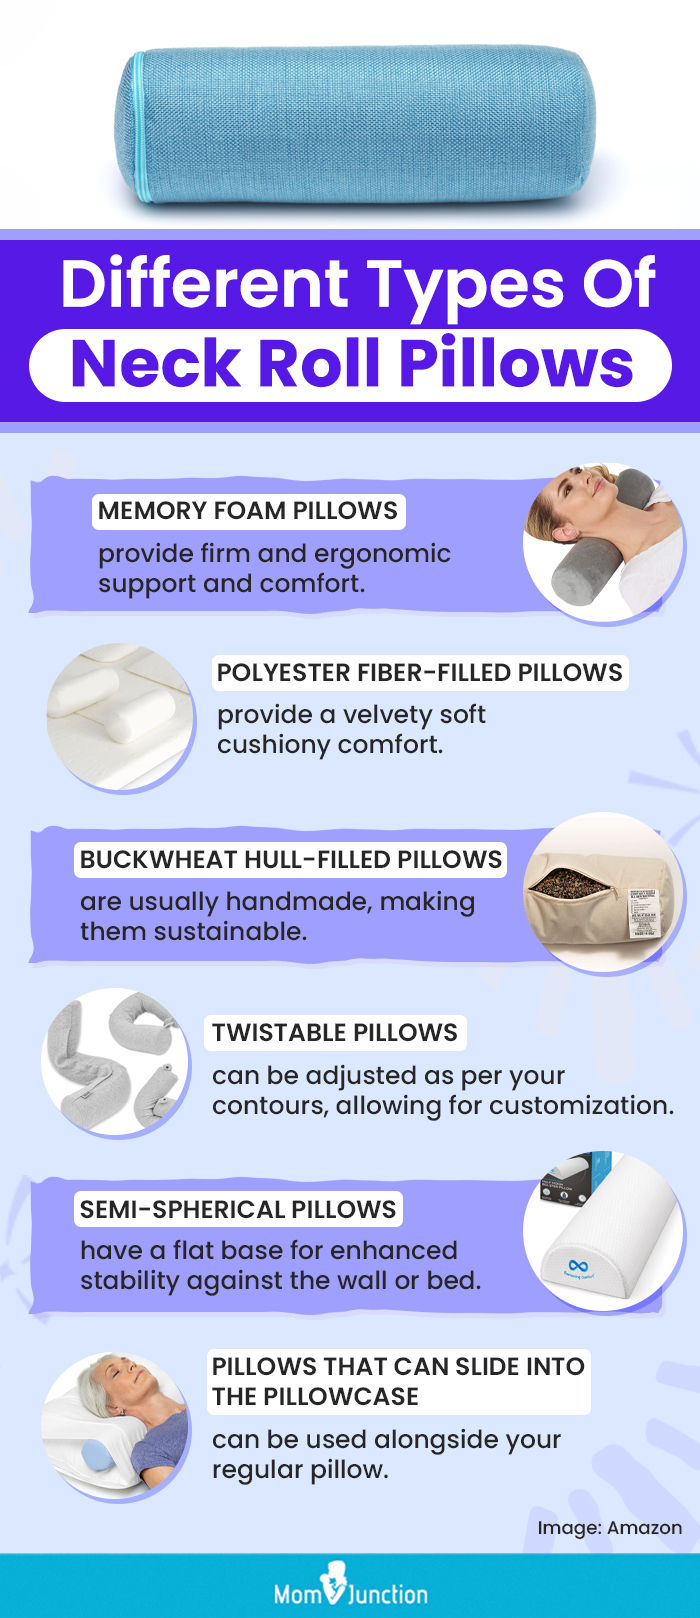 Different Types Of Neck Roll Pillows (infographic)